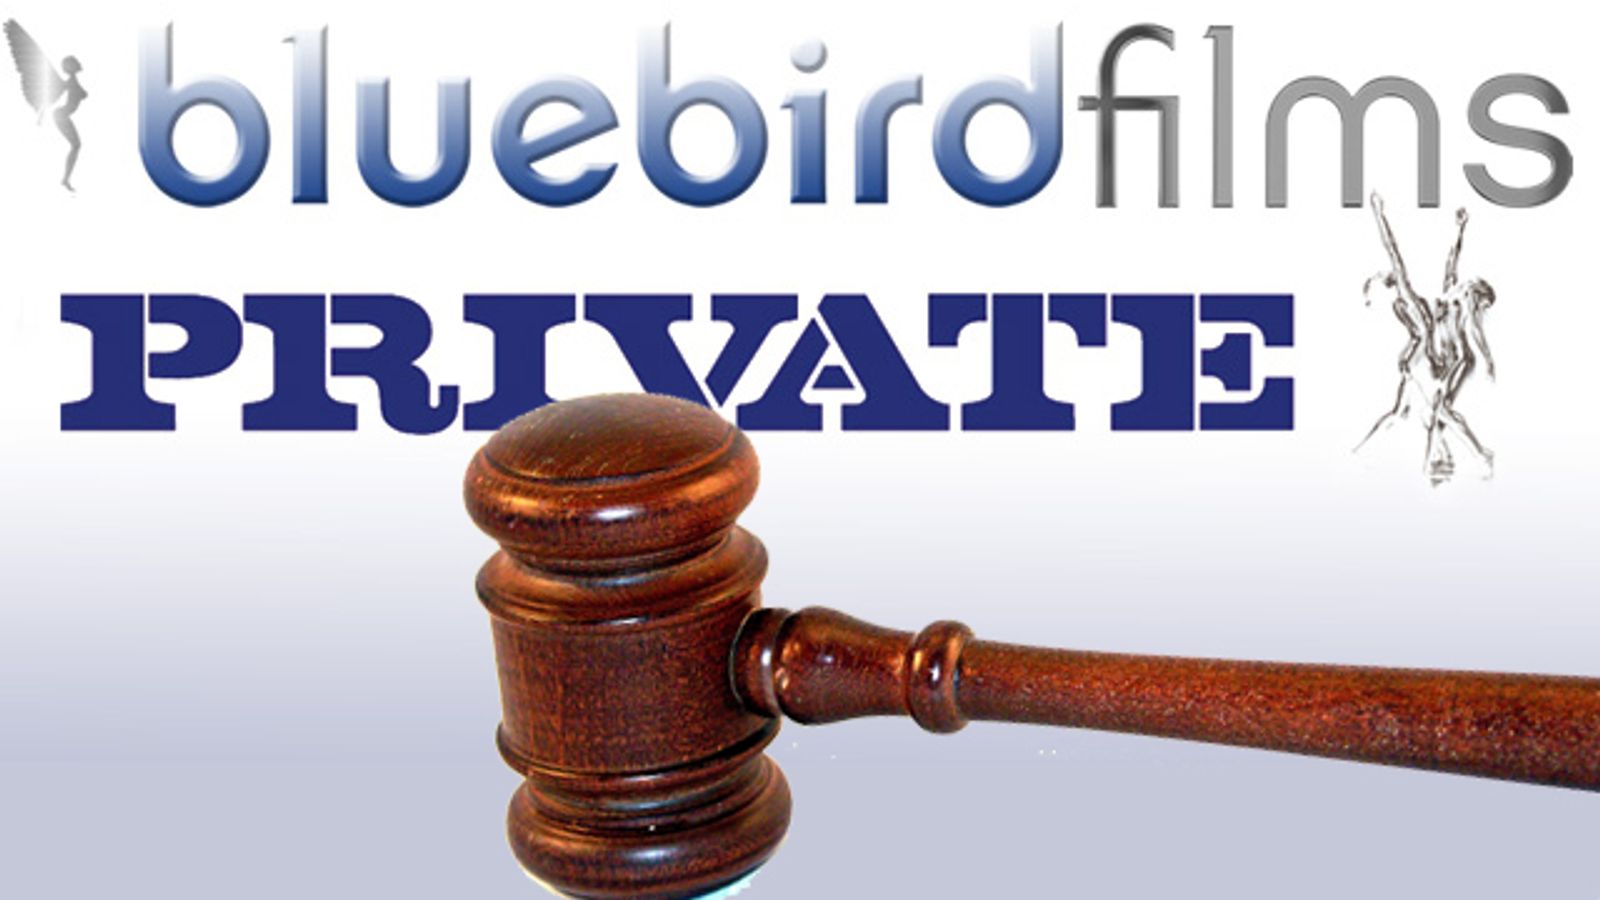 Bluebird Films, Private Media Face Off in Countersuits